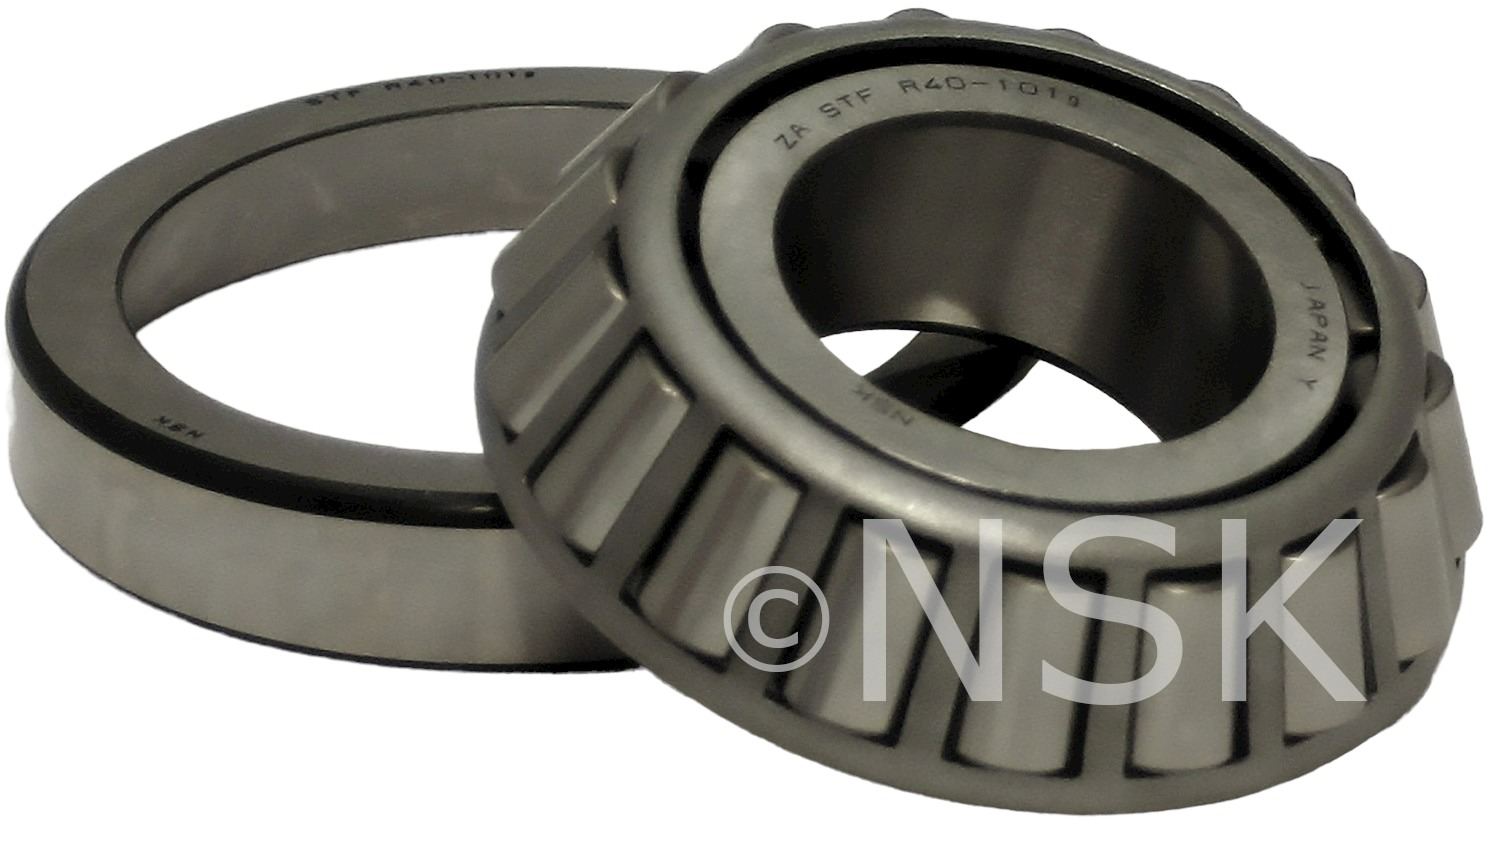 NSK Differential Pinion Bearing  top view frsport STFR40-101G5U1U01